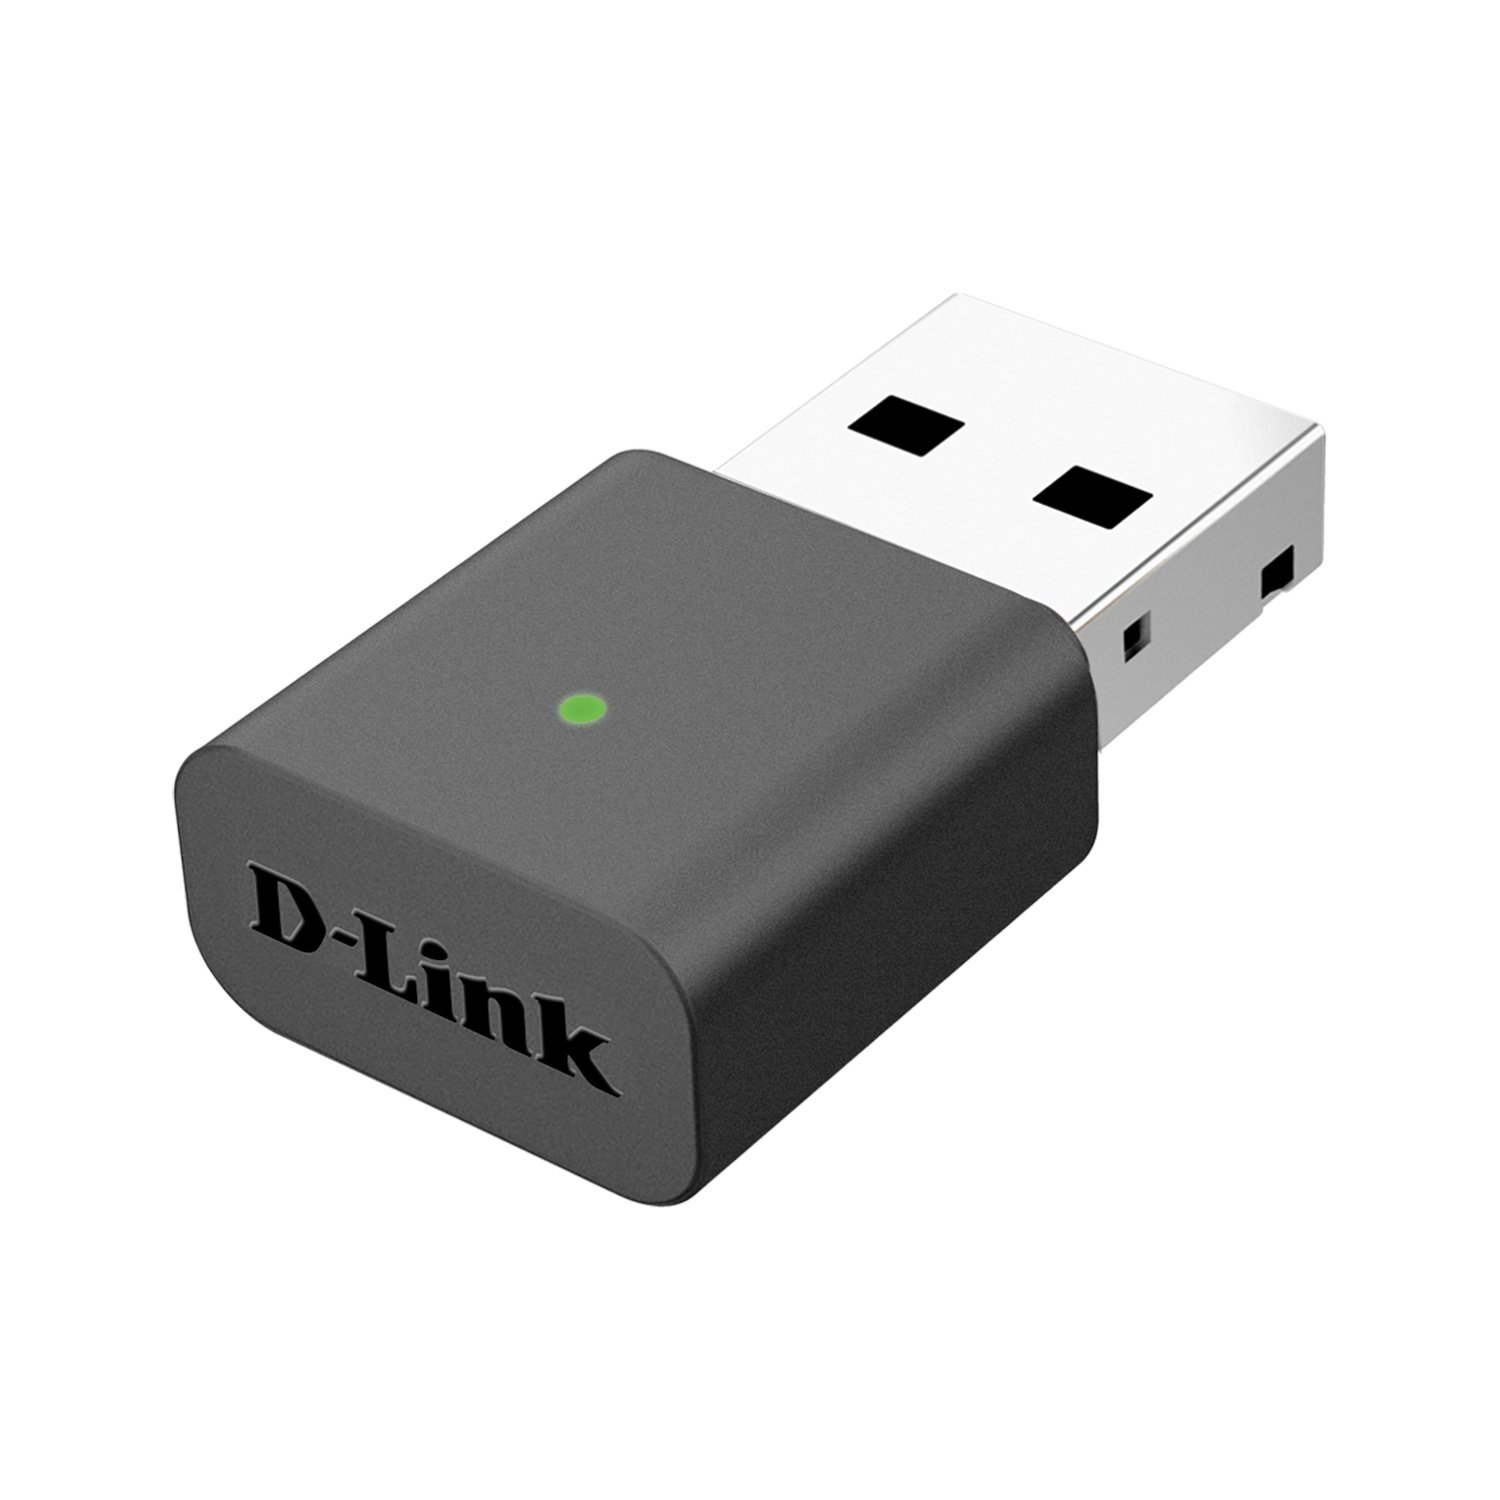 D-Link produced a USB adapter that joins Wi-Fi 6 to the laptop